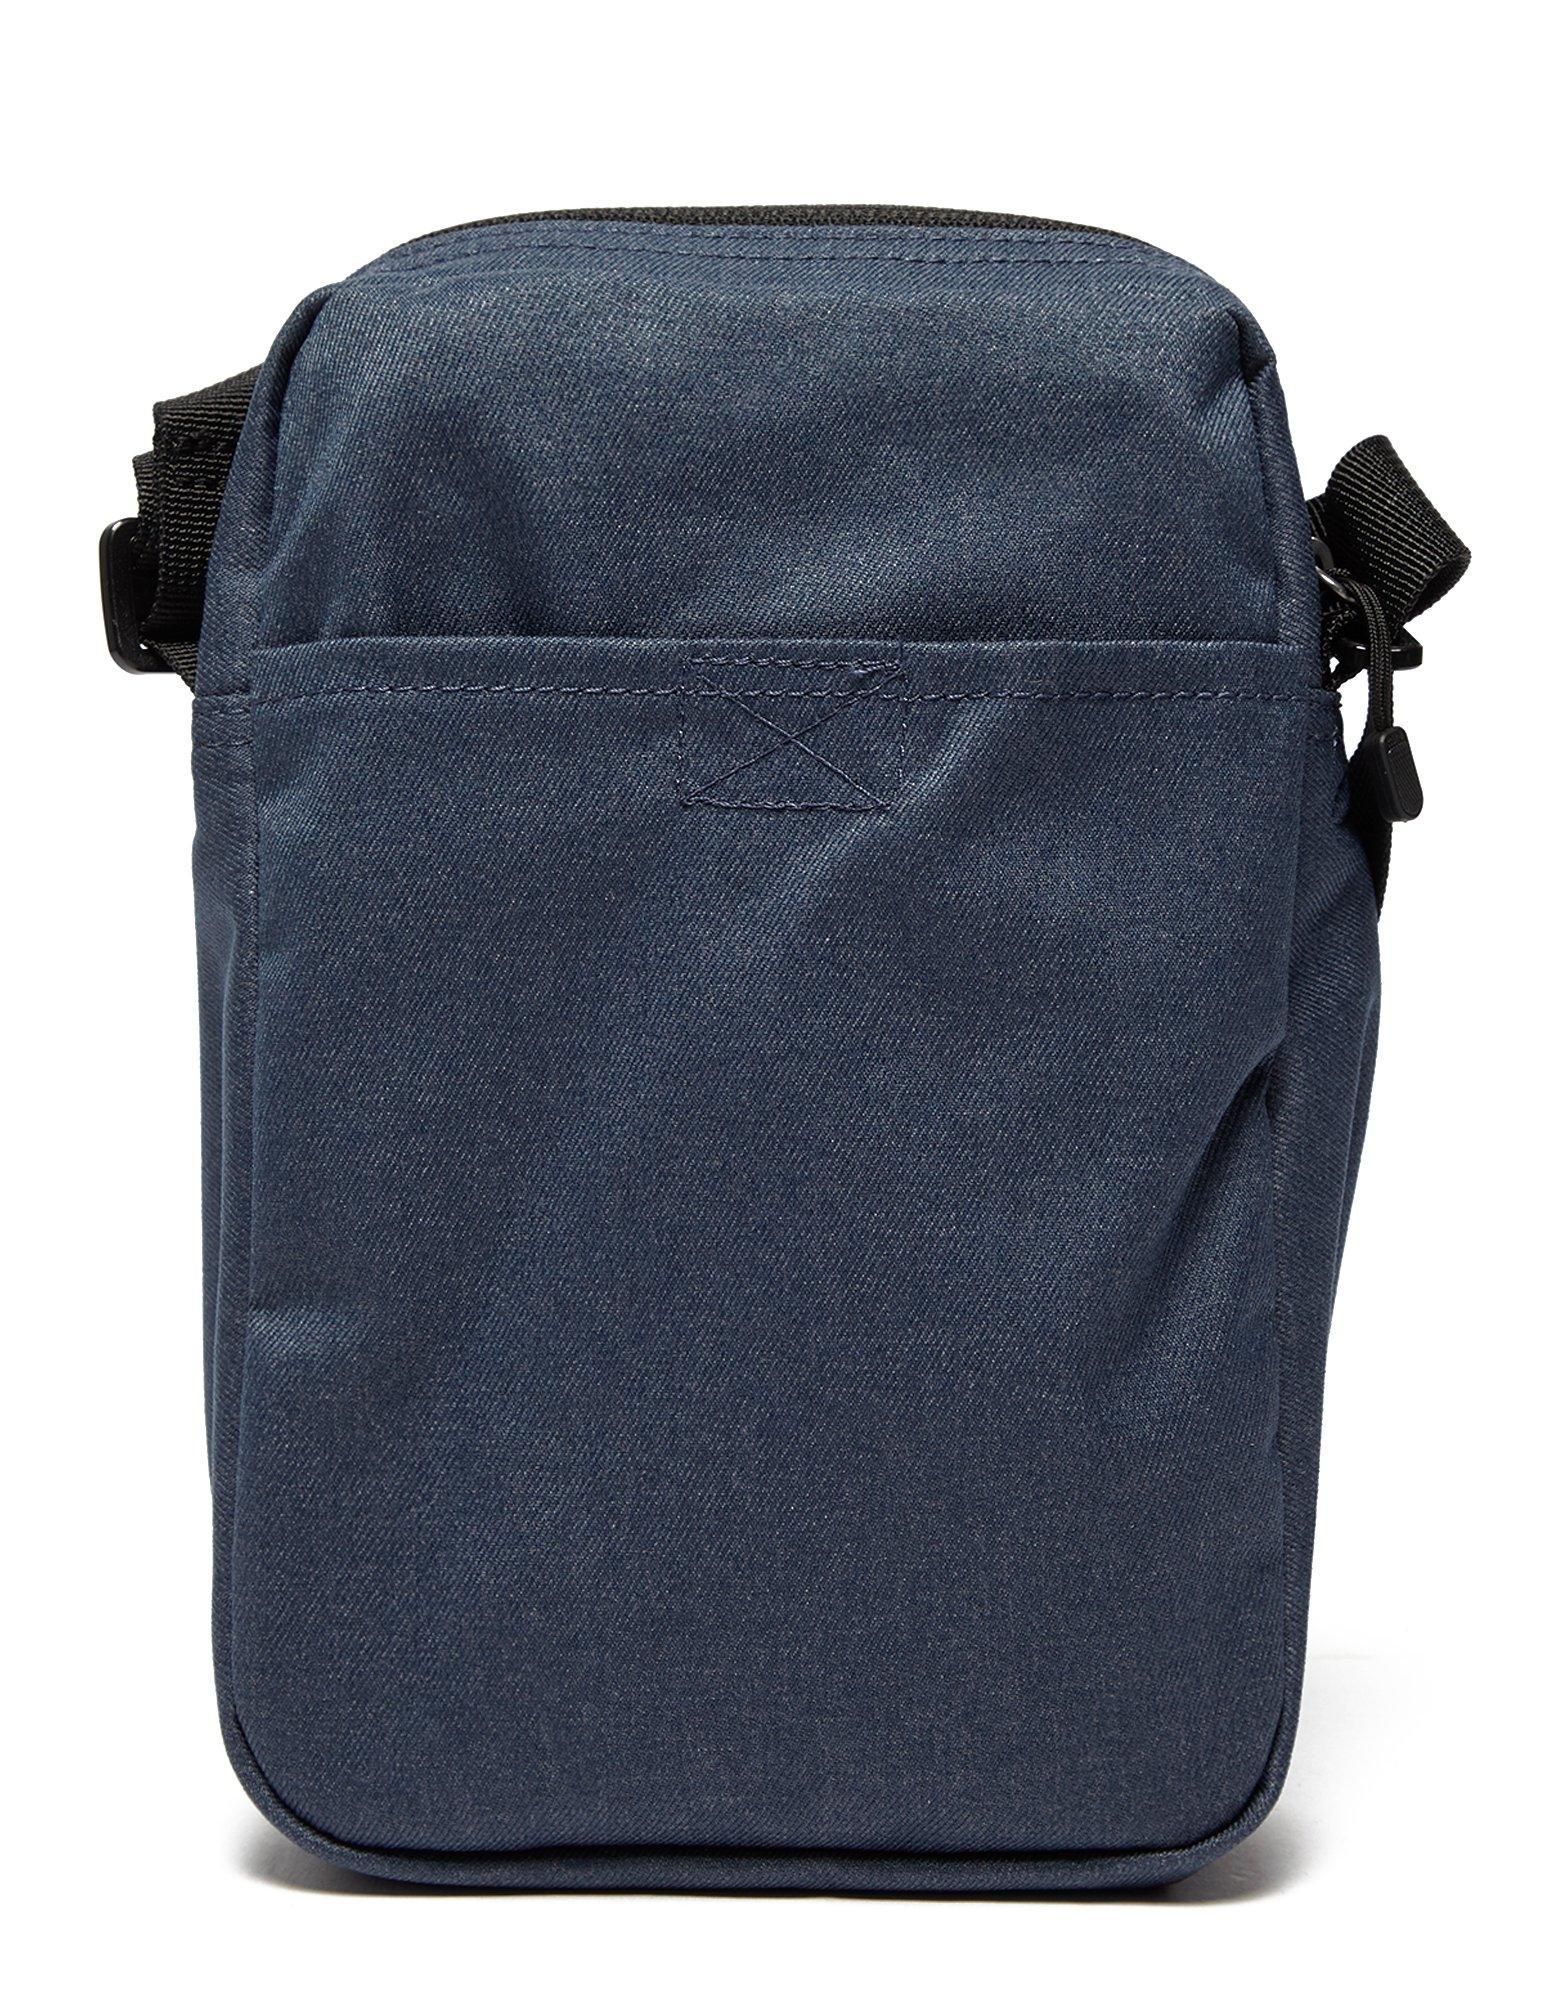 Lyst - Nike Core Small Crossbody Bag in Blue for Men